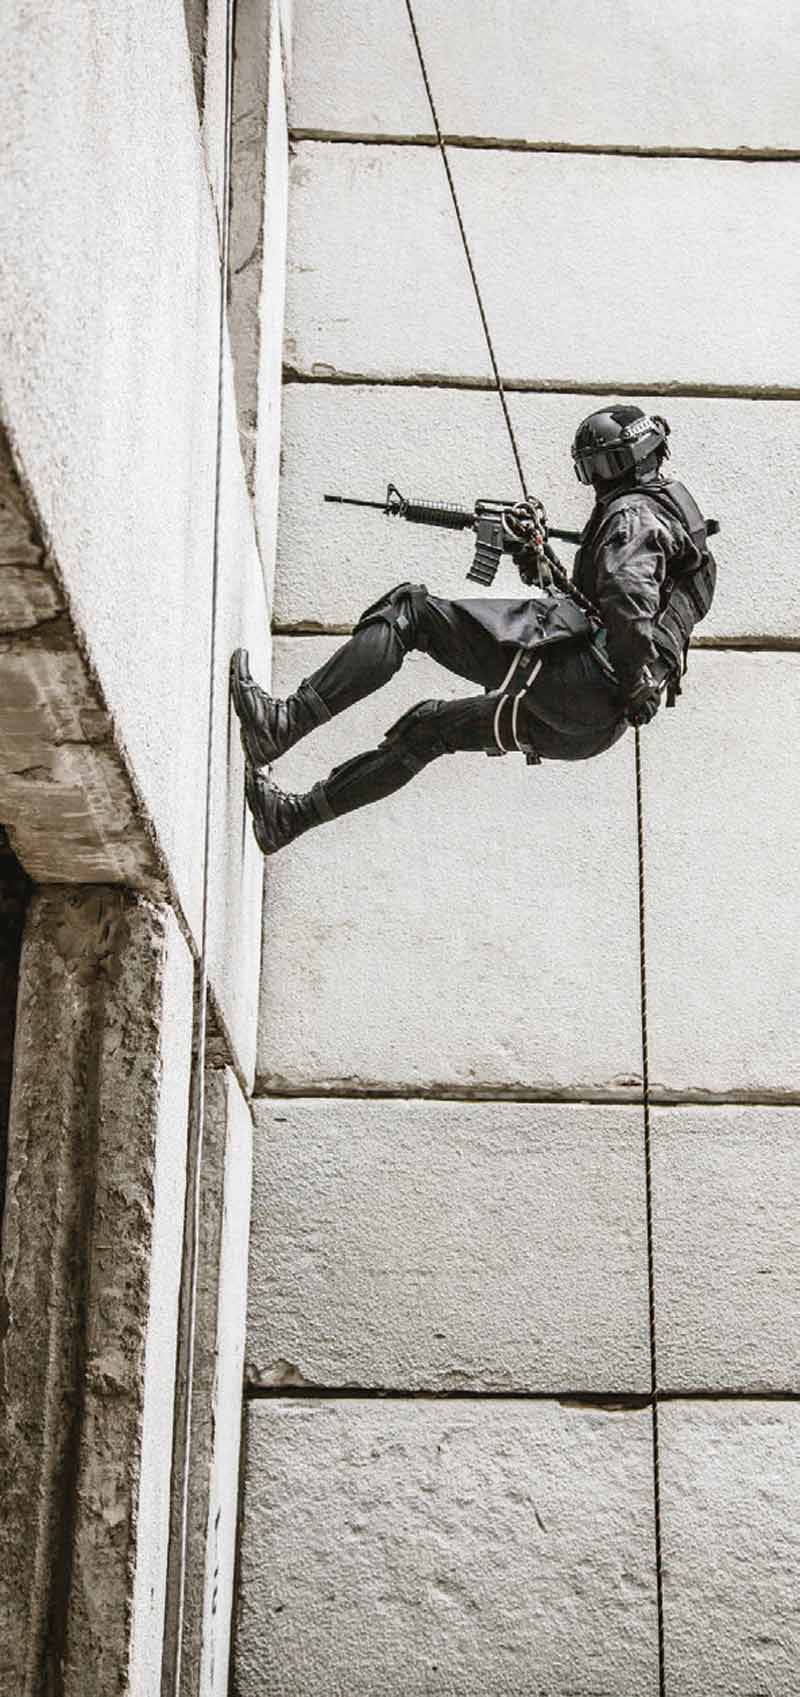 How To Establish a Tactical Rappelling Program - SWAT Survival, Weapons